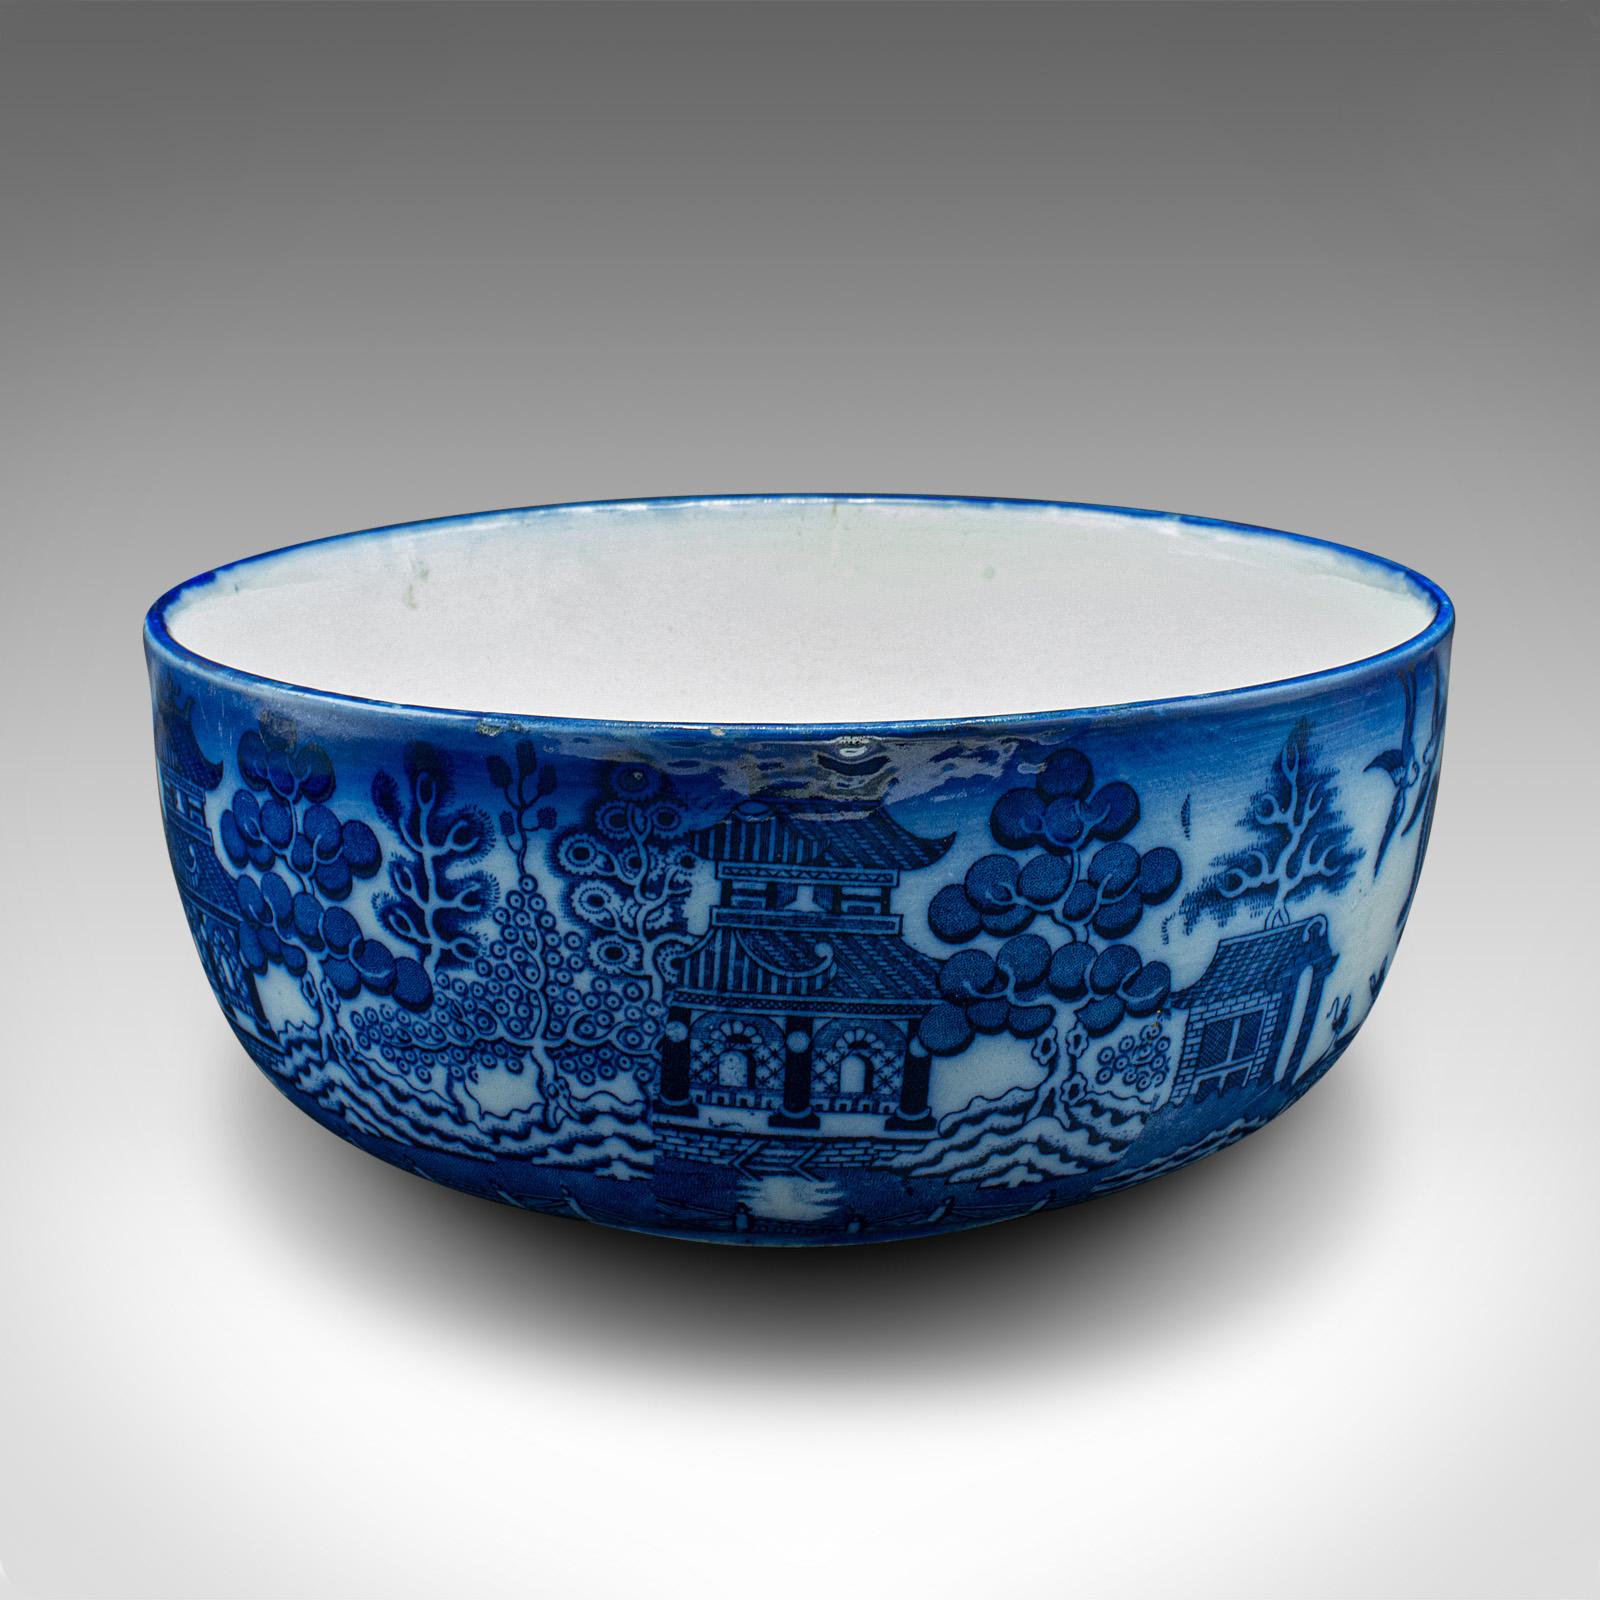 This is an antique decorative fruit bowl. An English, ceramic transfer printed serving dish, dating to the late Victorian period, circa 1900.

Appealing Victorian example of blue and white ceramics
Displays a desirable aged patina throughout
White